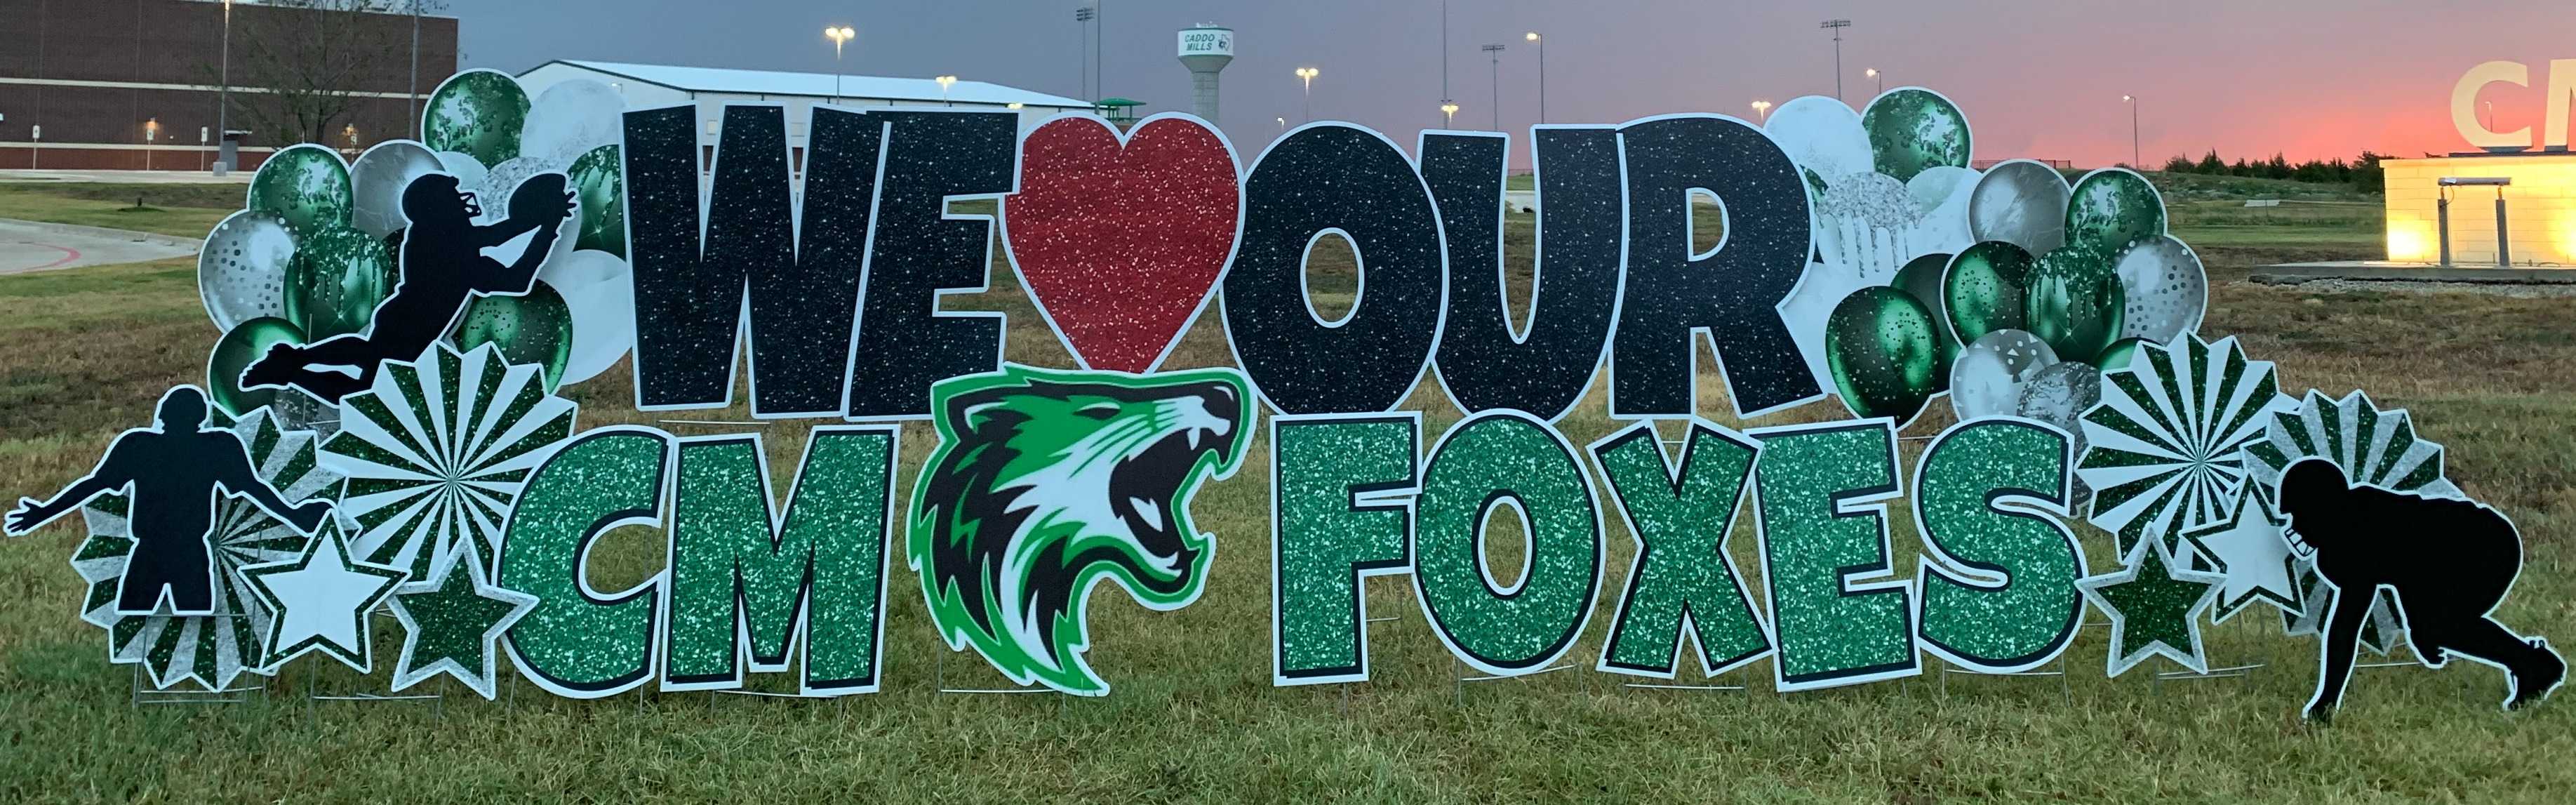 Yard card sign we love our cm foxes 